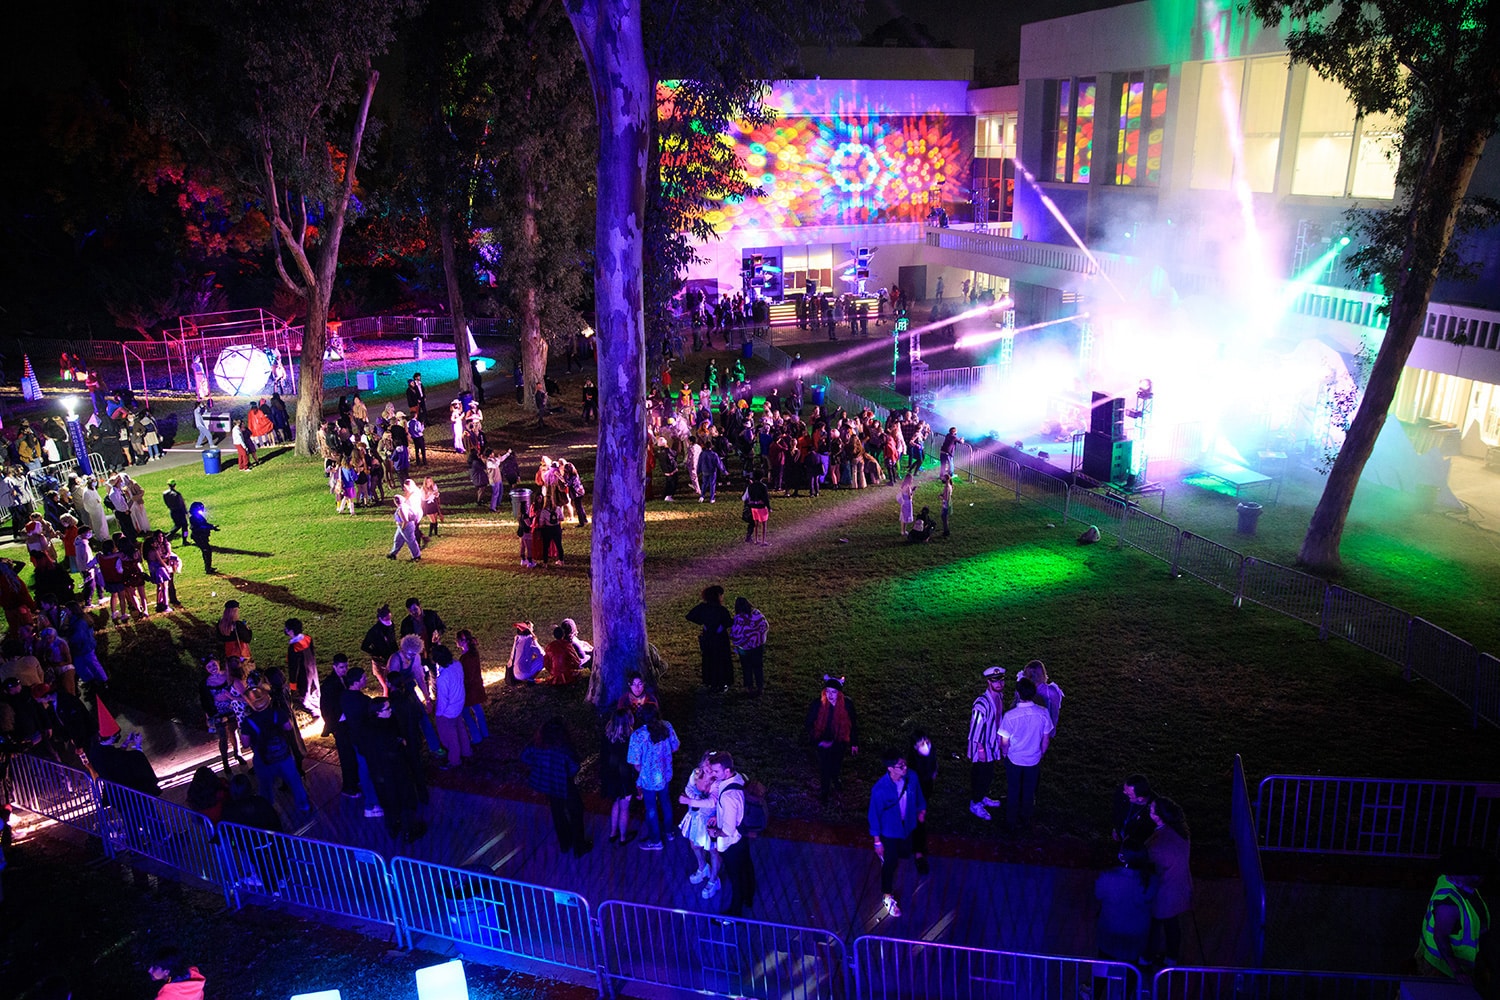 a nighttime shot of CalArts with lights and people milling about